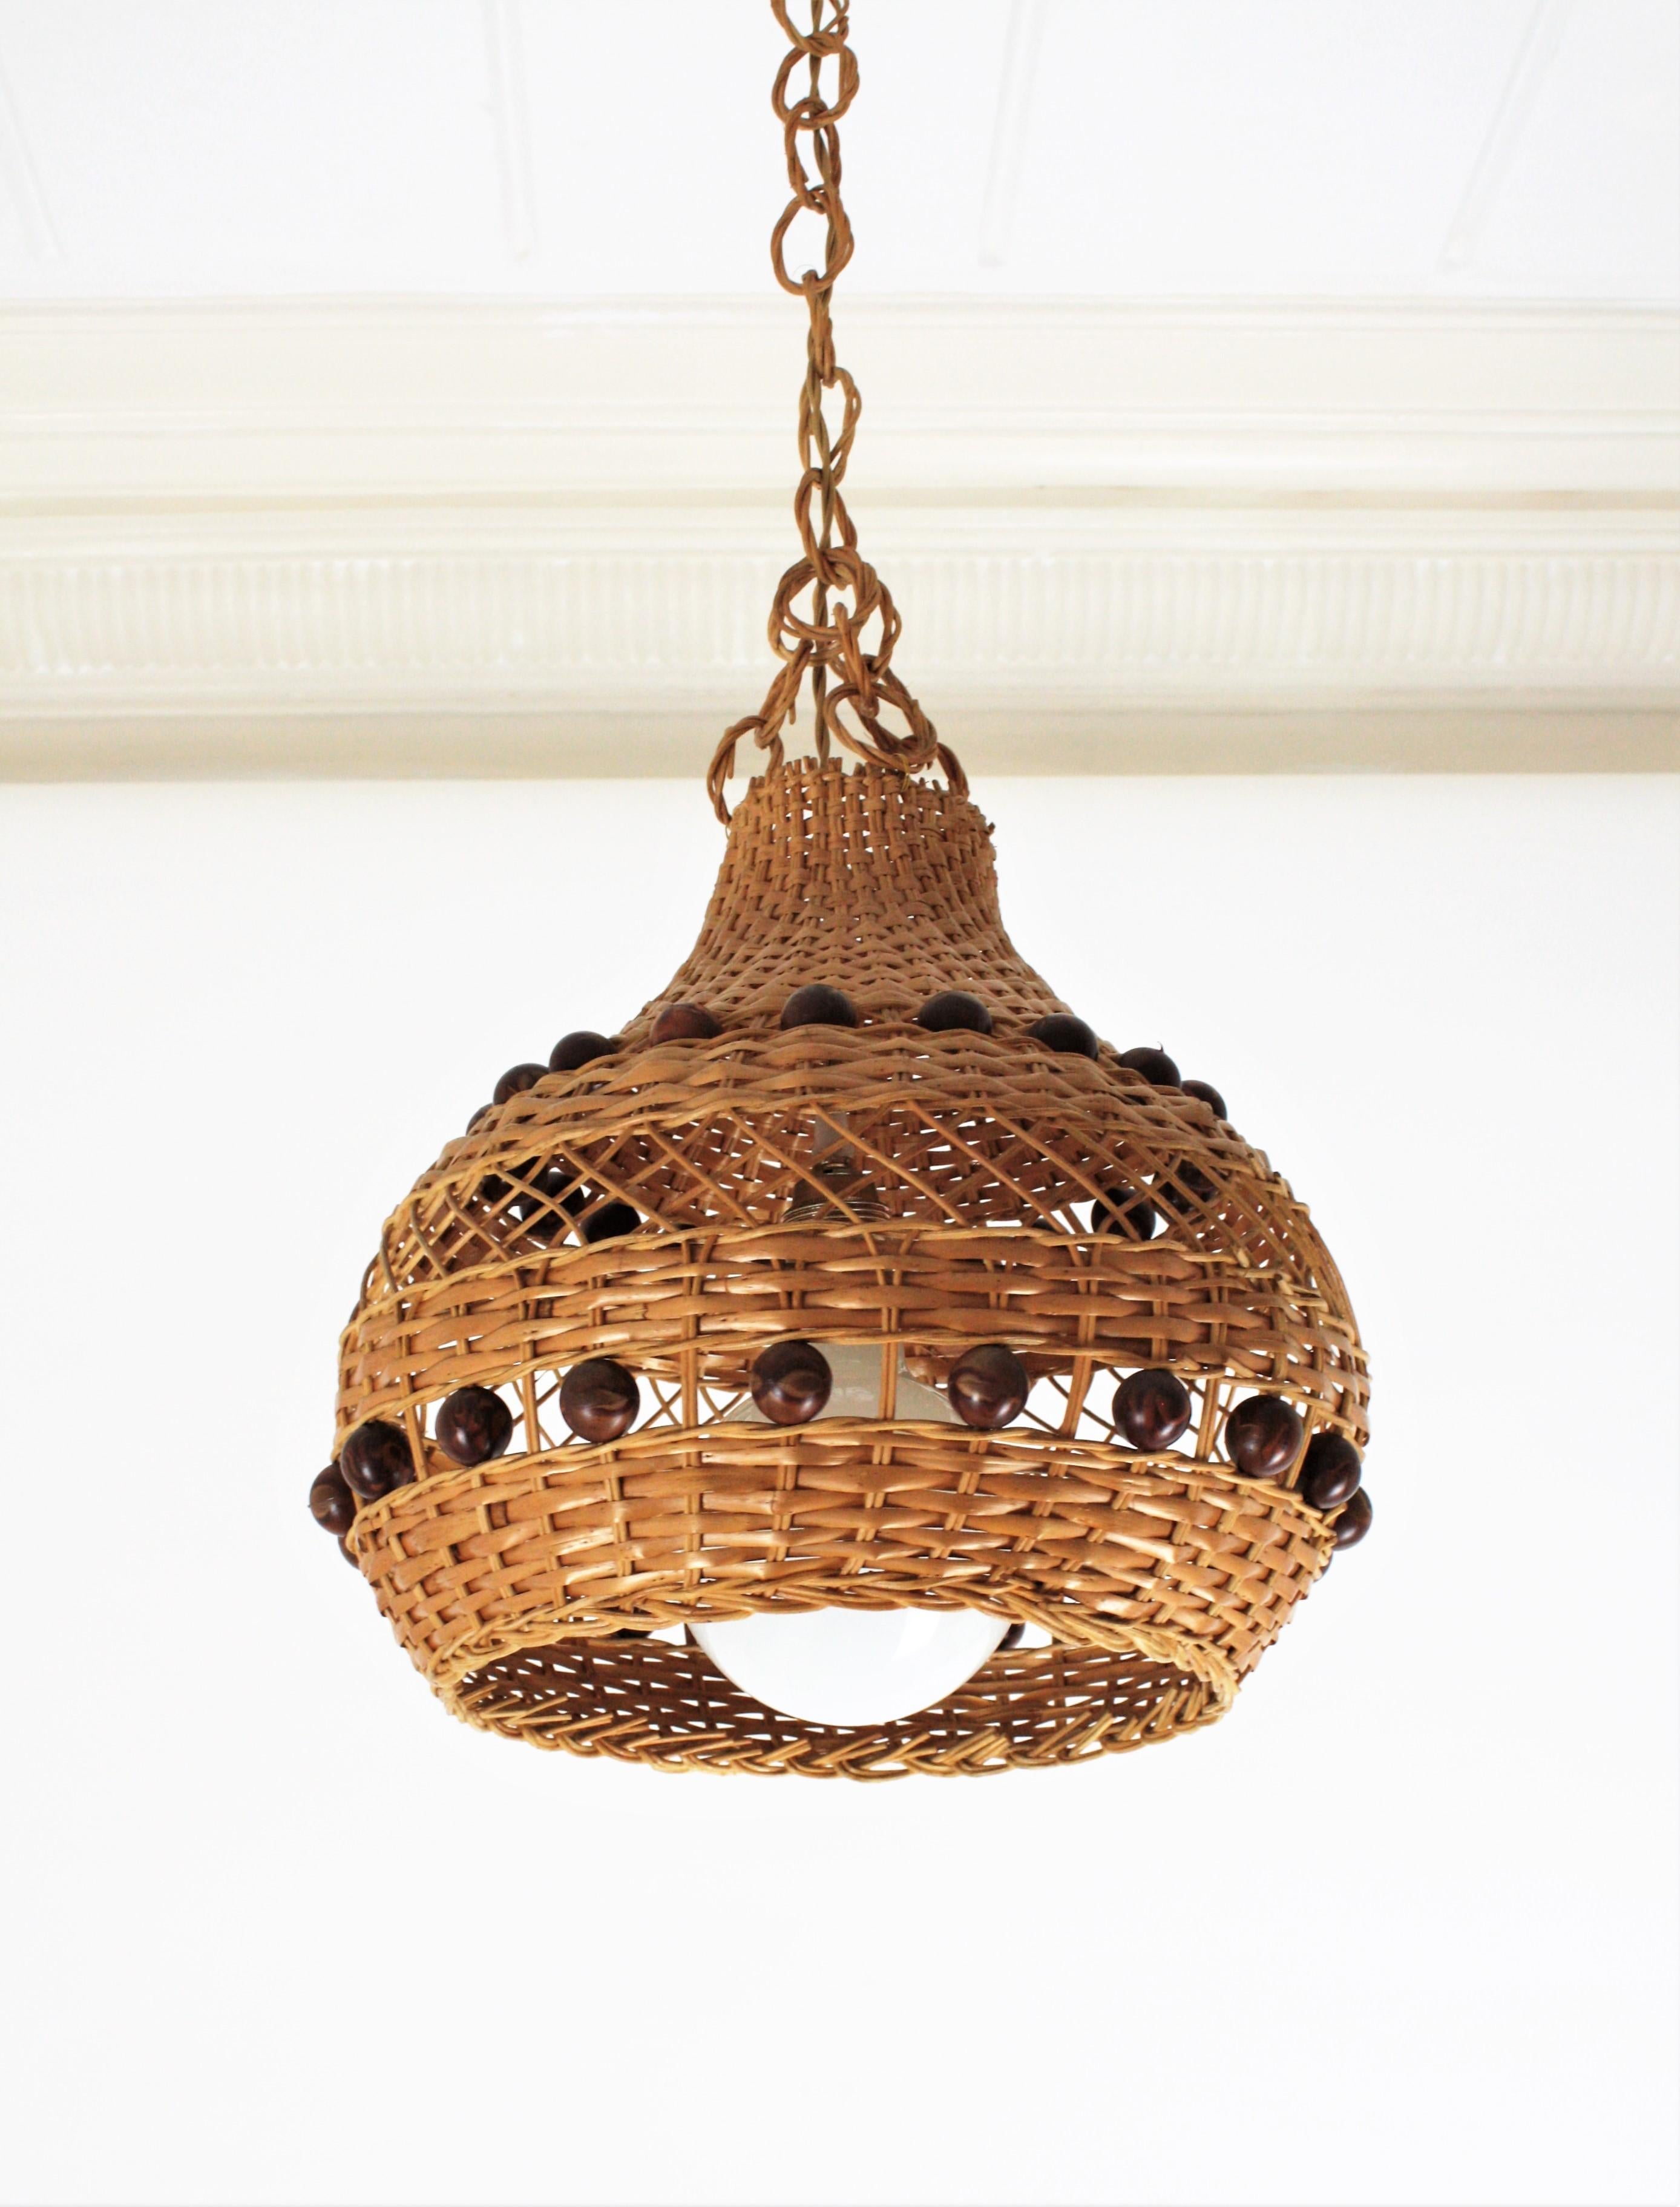 Wicker Spanish Rattan Pendant Light / Lantern with Balls Accents For Sale